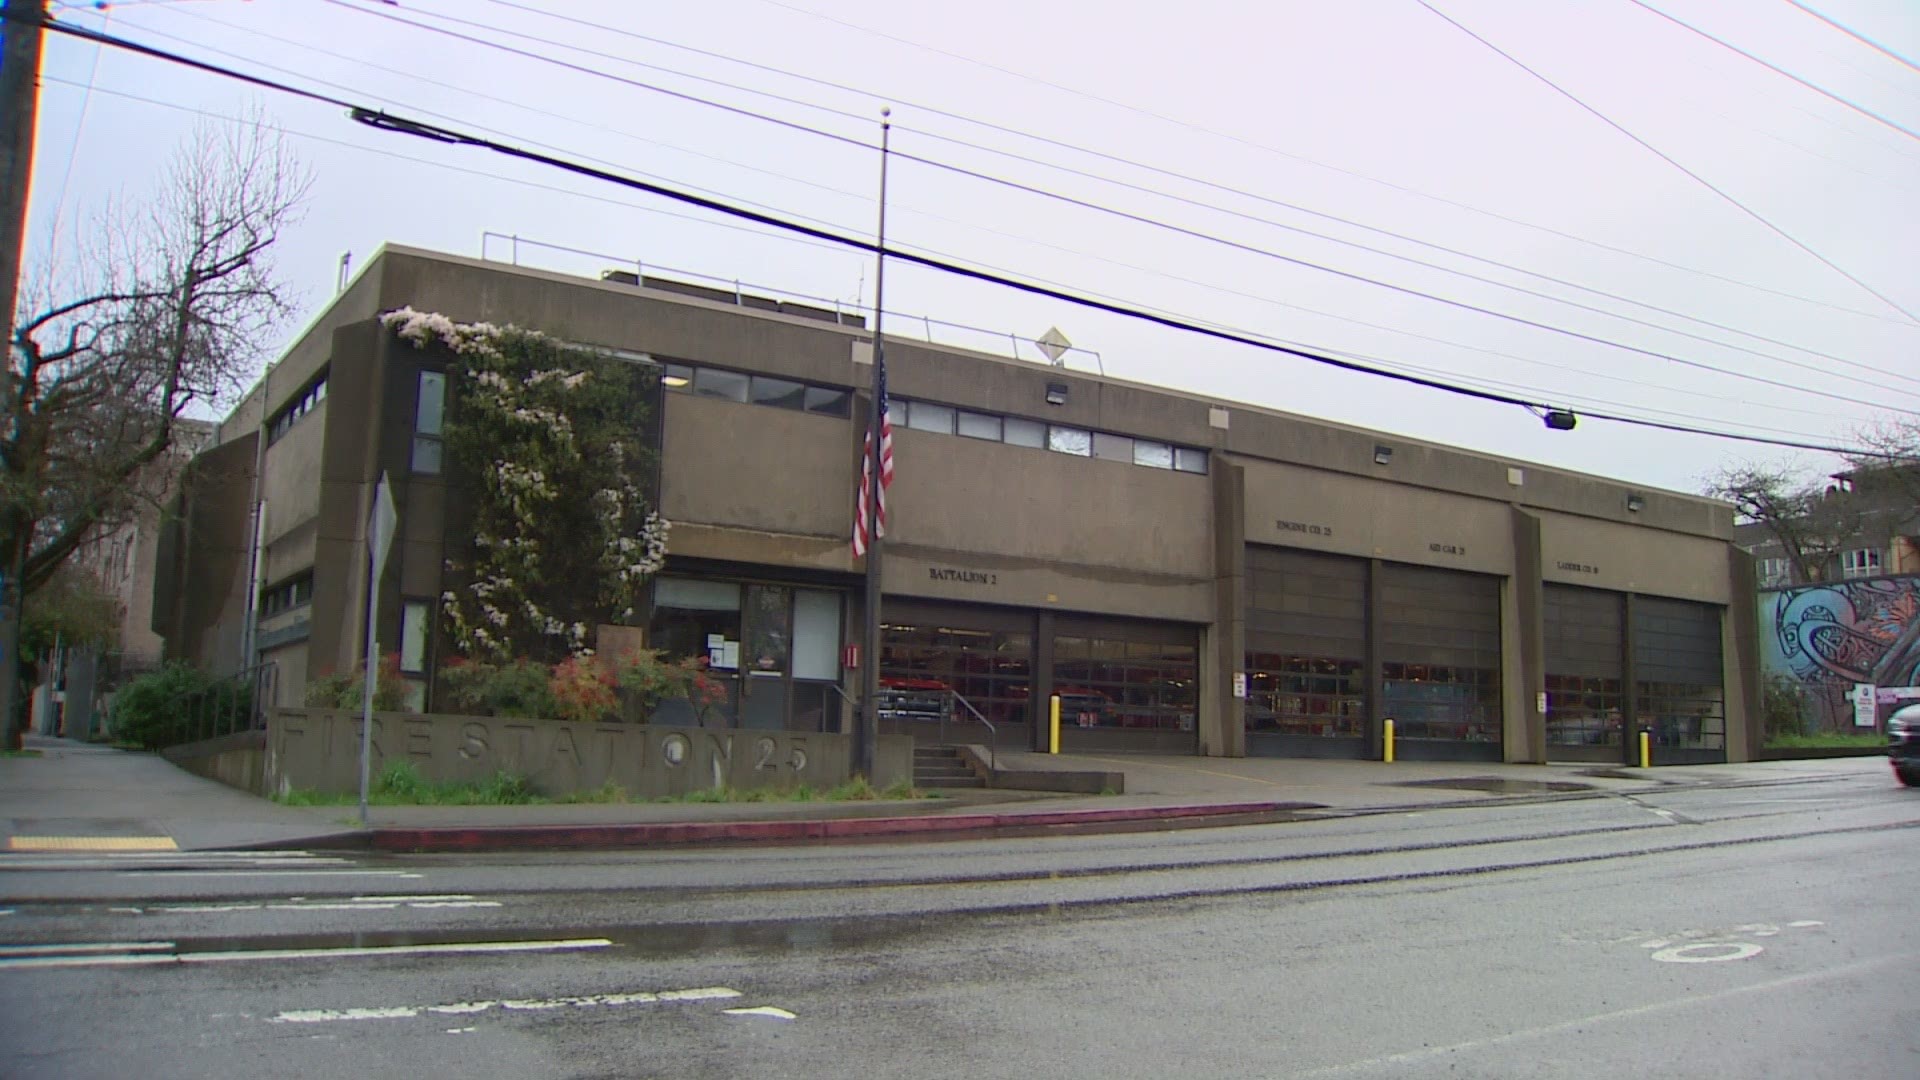 The firefighter is on leave from the Seattle Fire Department while an investigation is underway.